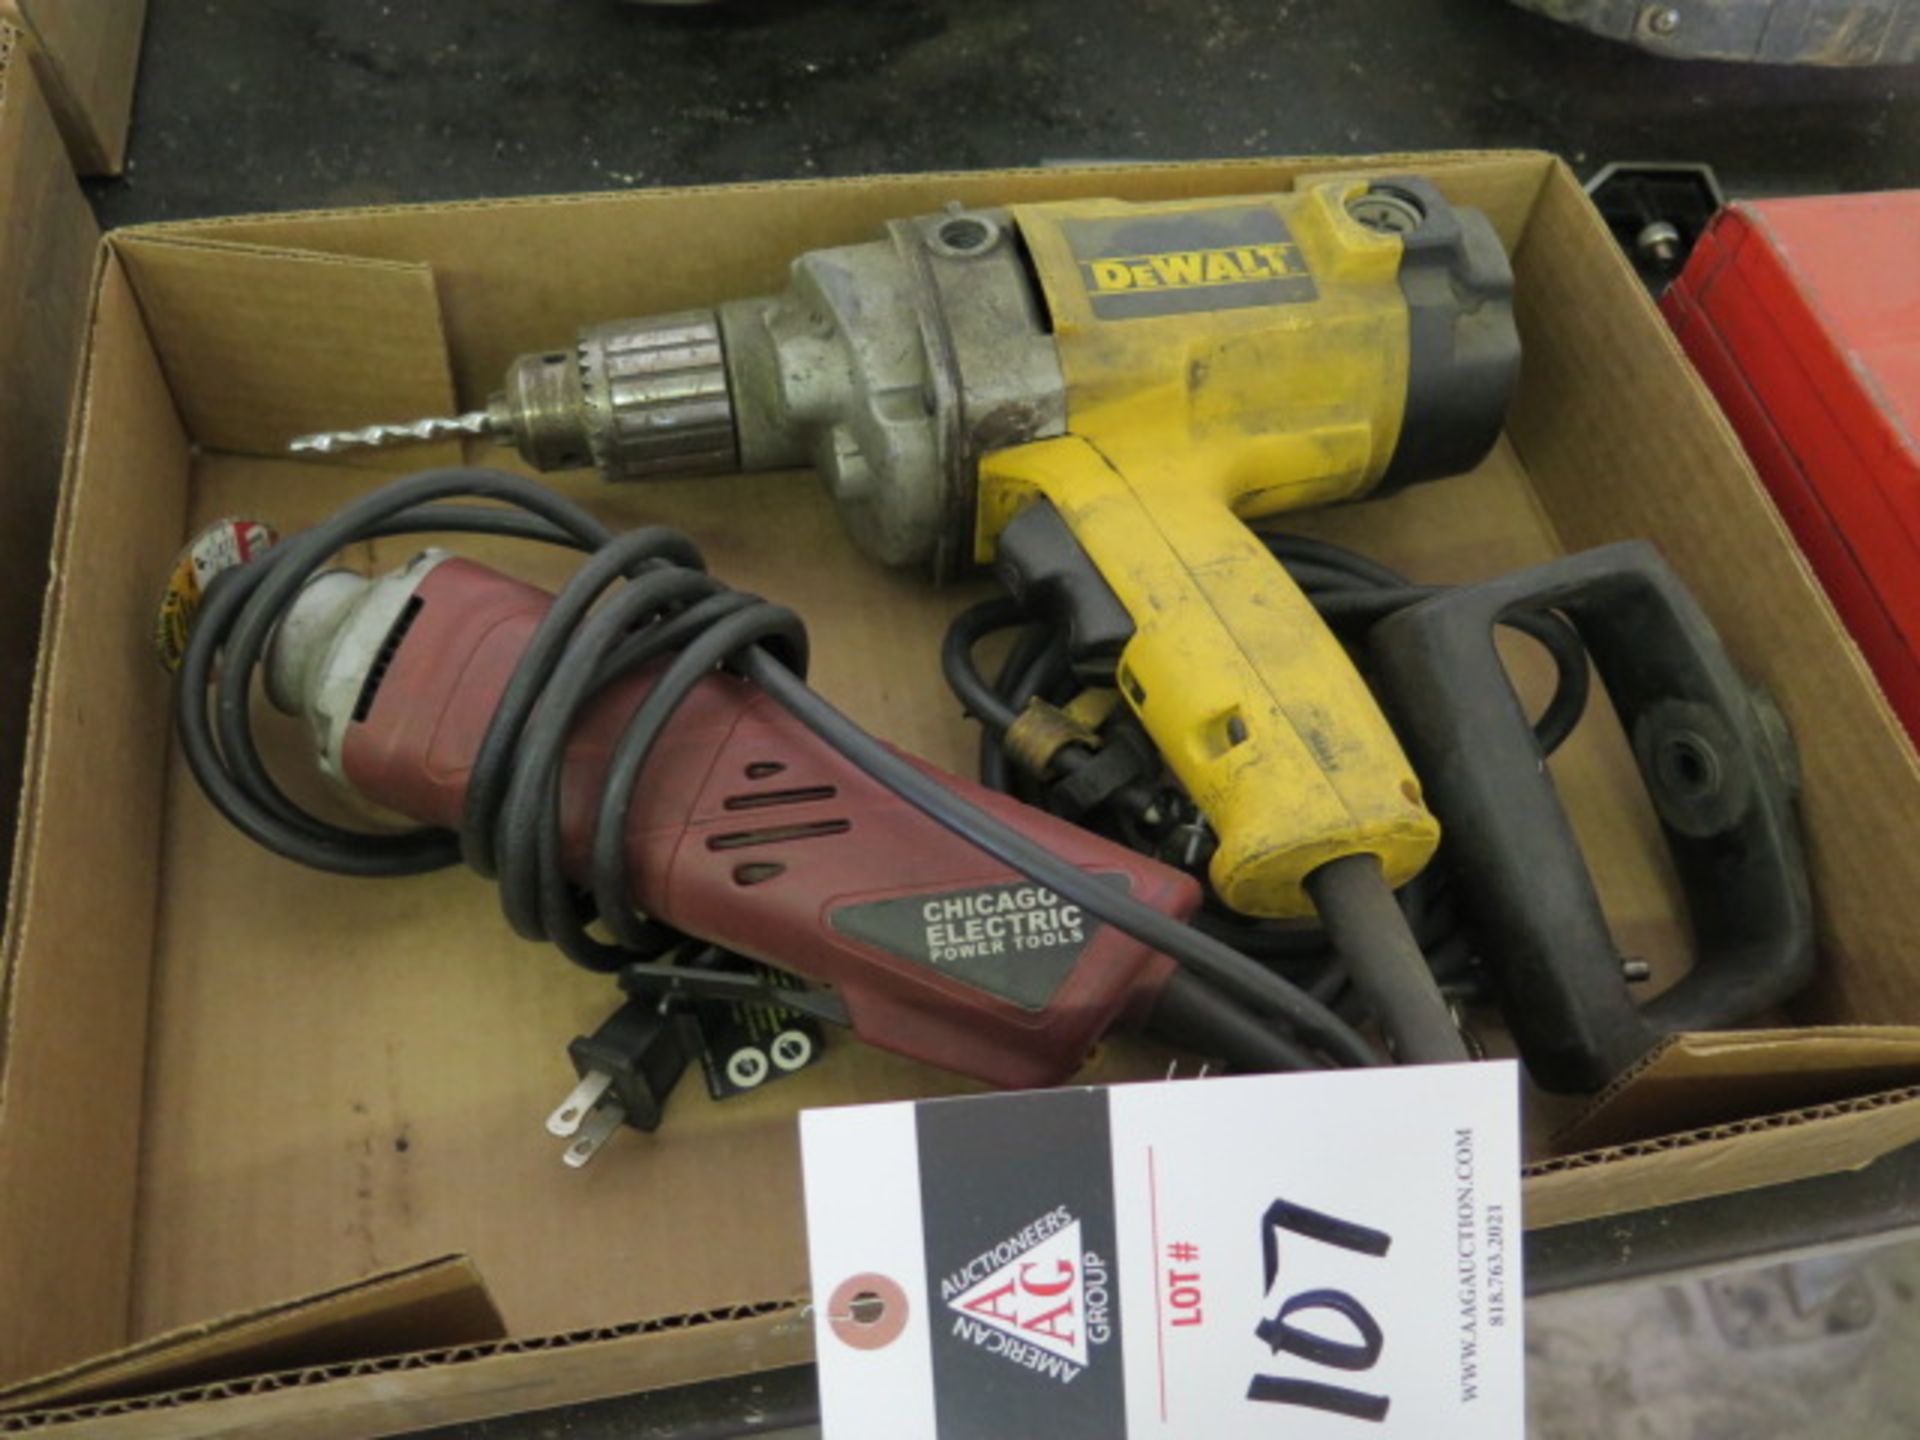 DeWalt Electric Drill and Chicage Grinder (SOLD AS-IS - NO WARRANTY)